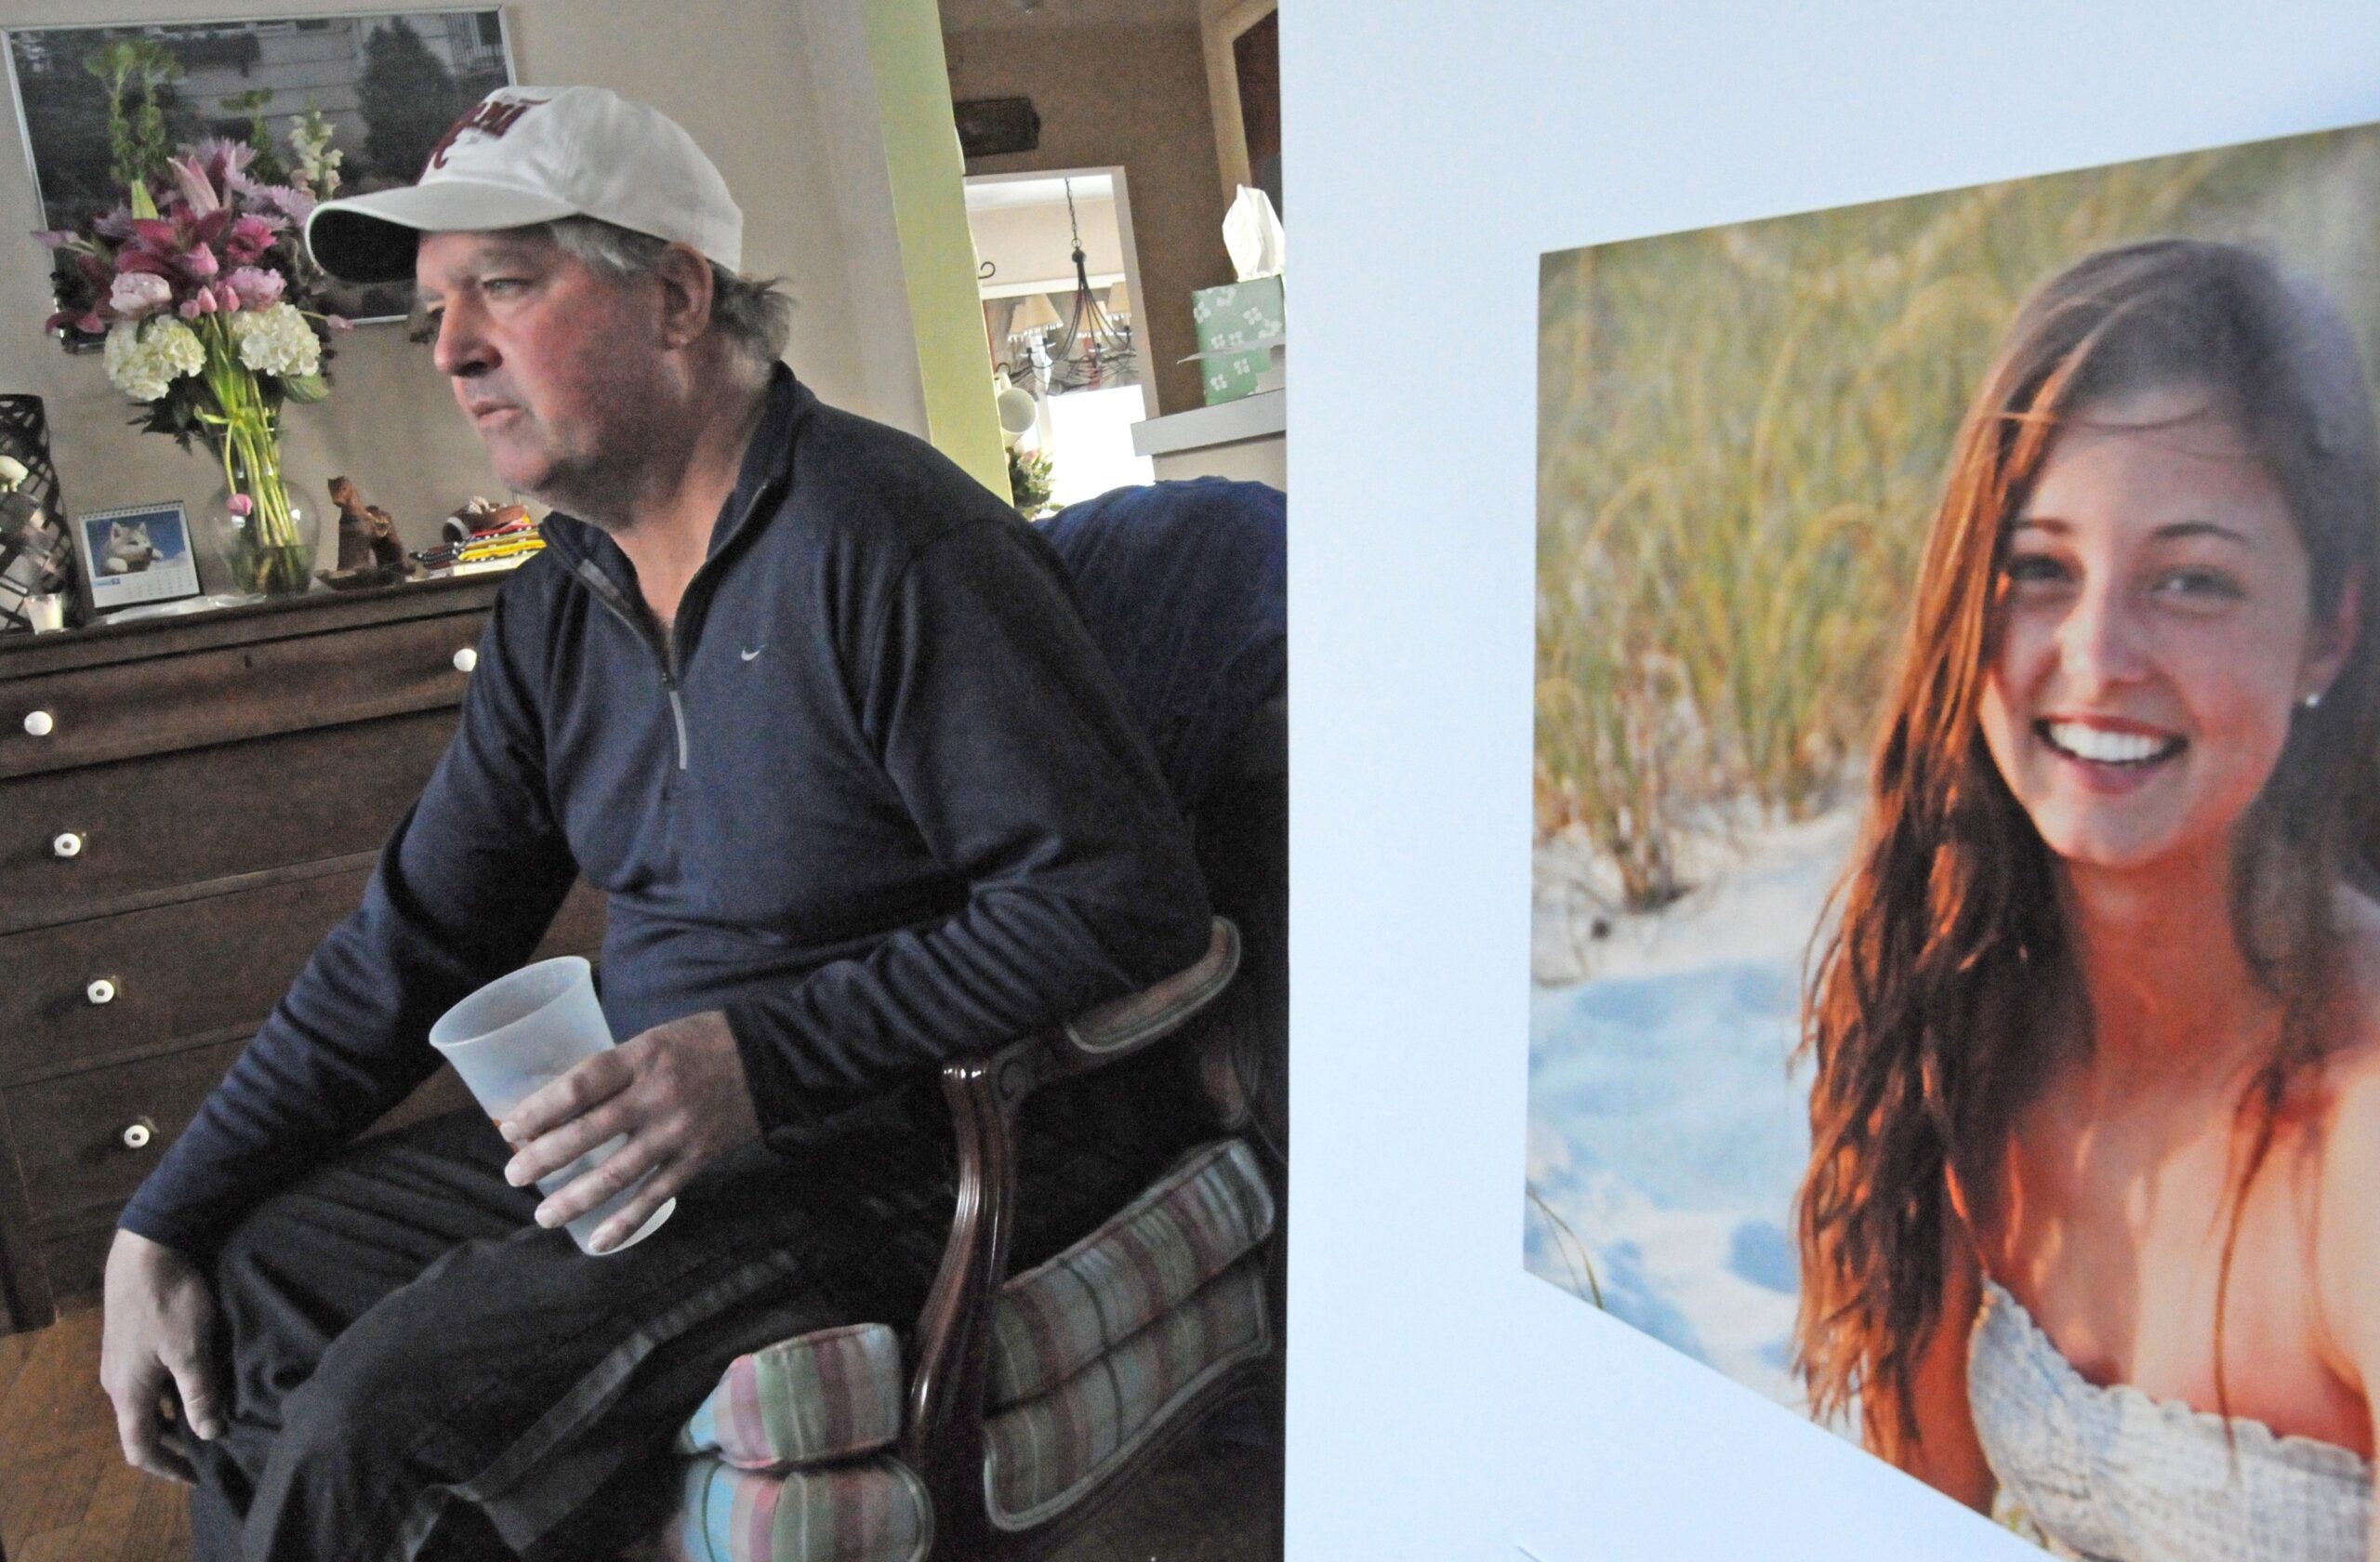 At the family's home in Allendale, Pa., James Holleran, father of Madison Holleran, University of Pennsylvania freshman who committed suicide, talks about his daughter, Jan. 23, 2014, with a favorite photo of his daughter at right. (April Saul/Philadelphia Inquirer/MCT)